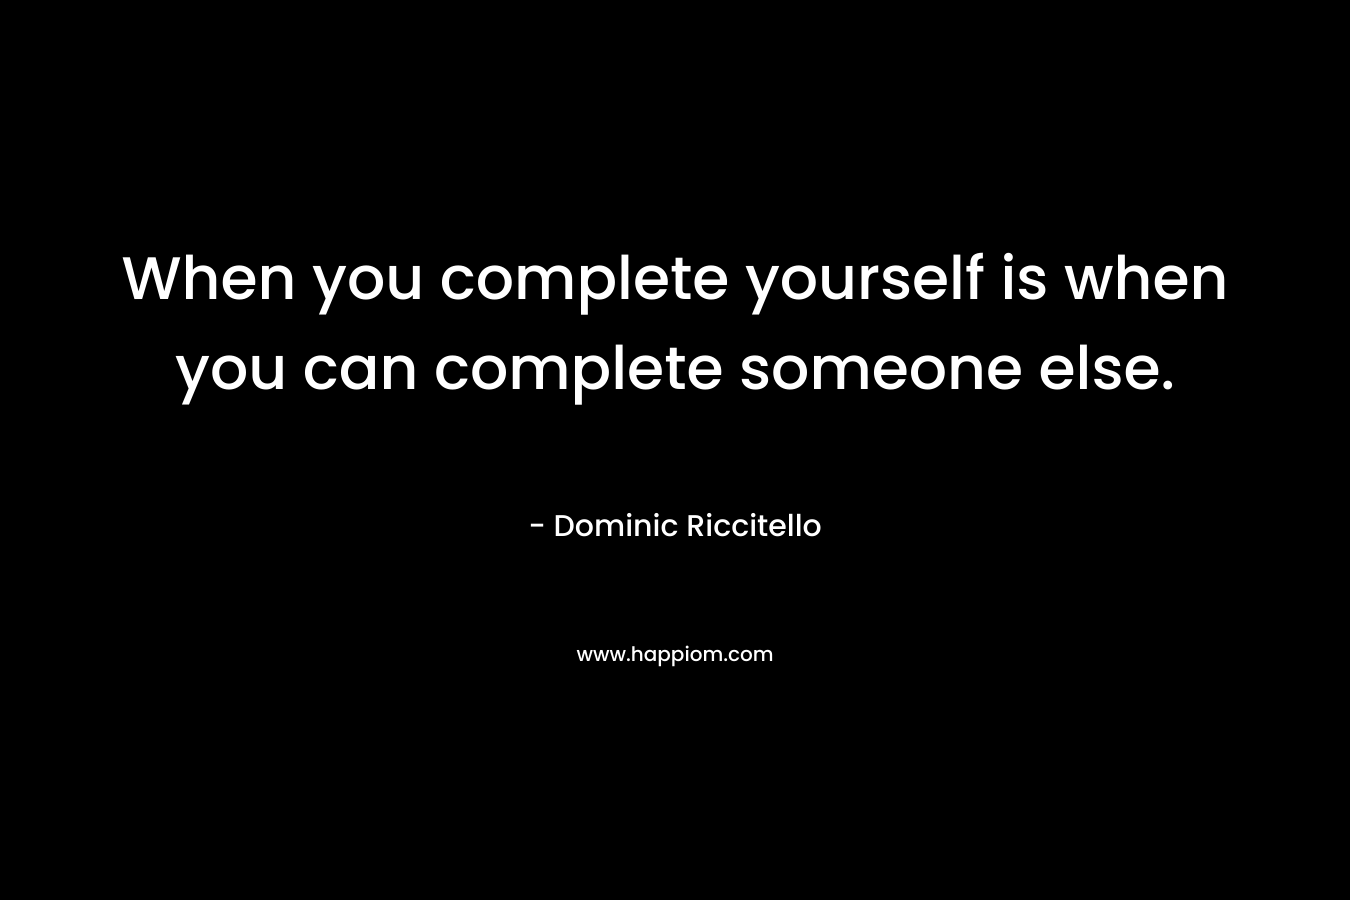 When you complete yourself is when you can complete someone else.